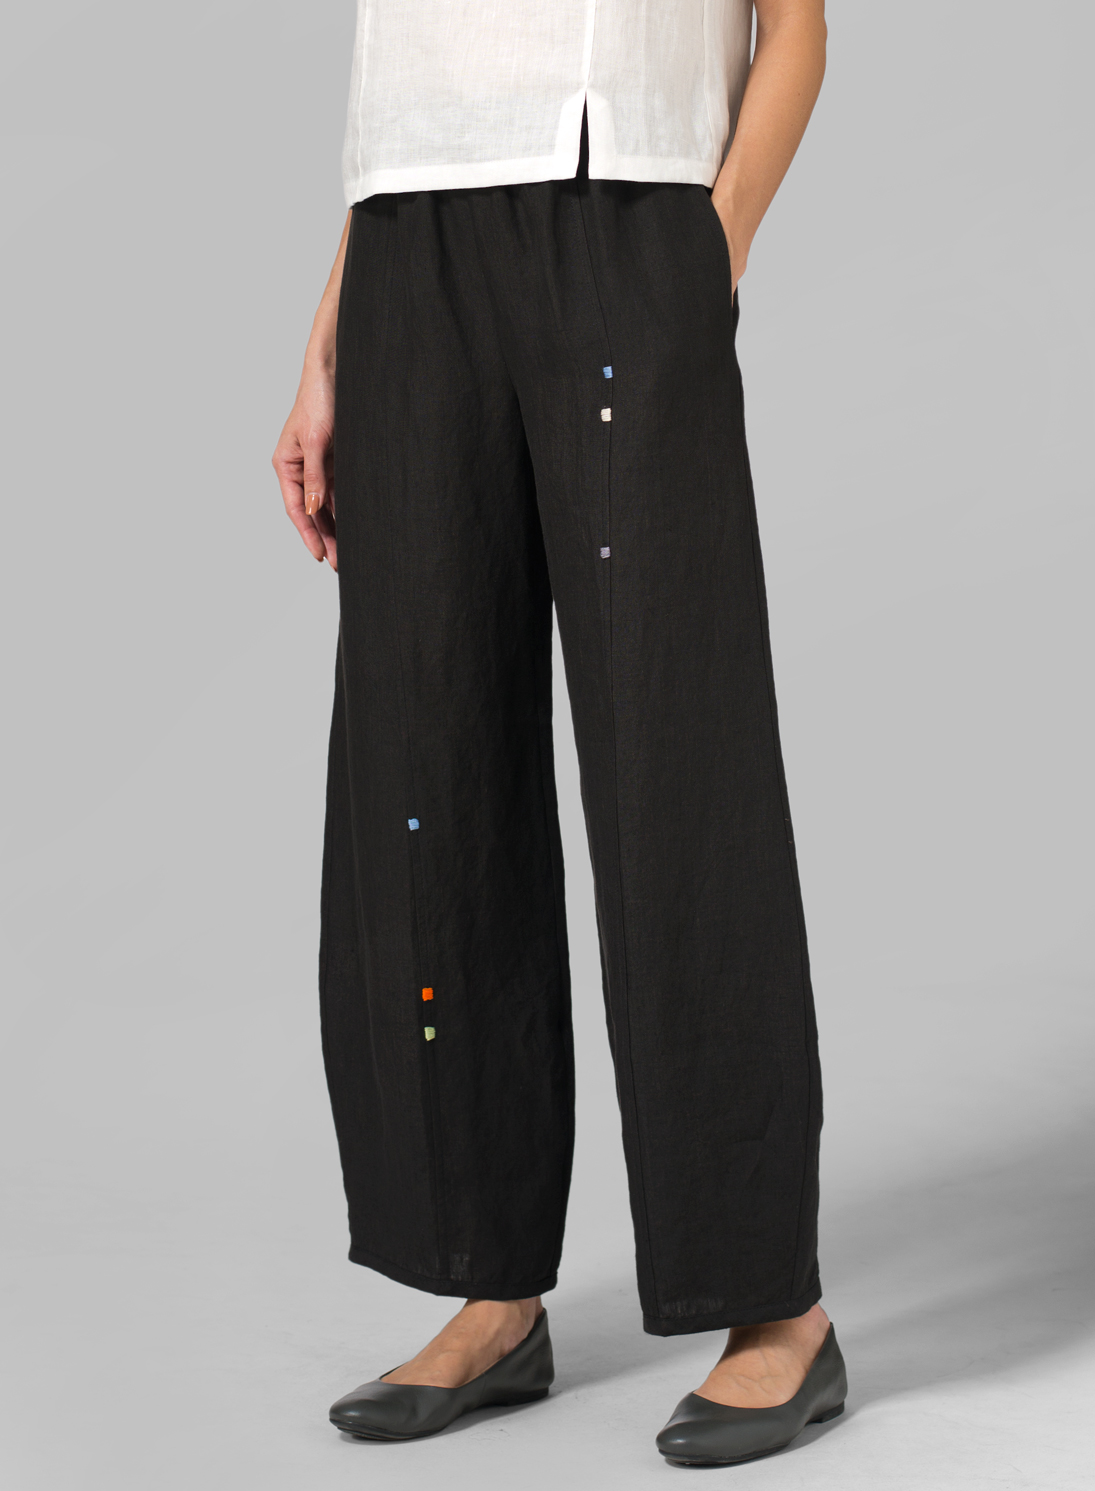 Linen Embroidered Ankle Length Pants - Plus Size